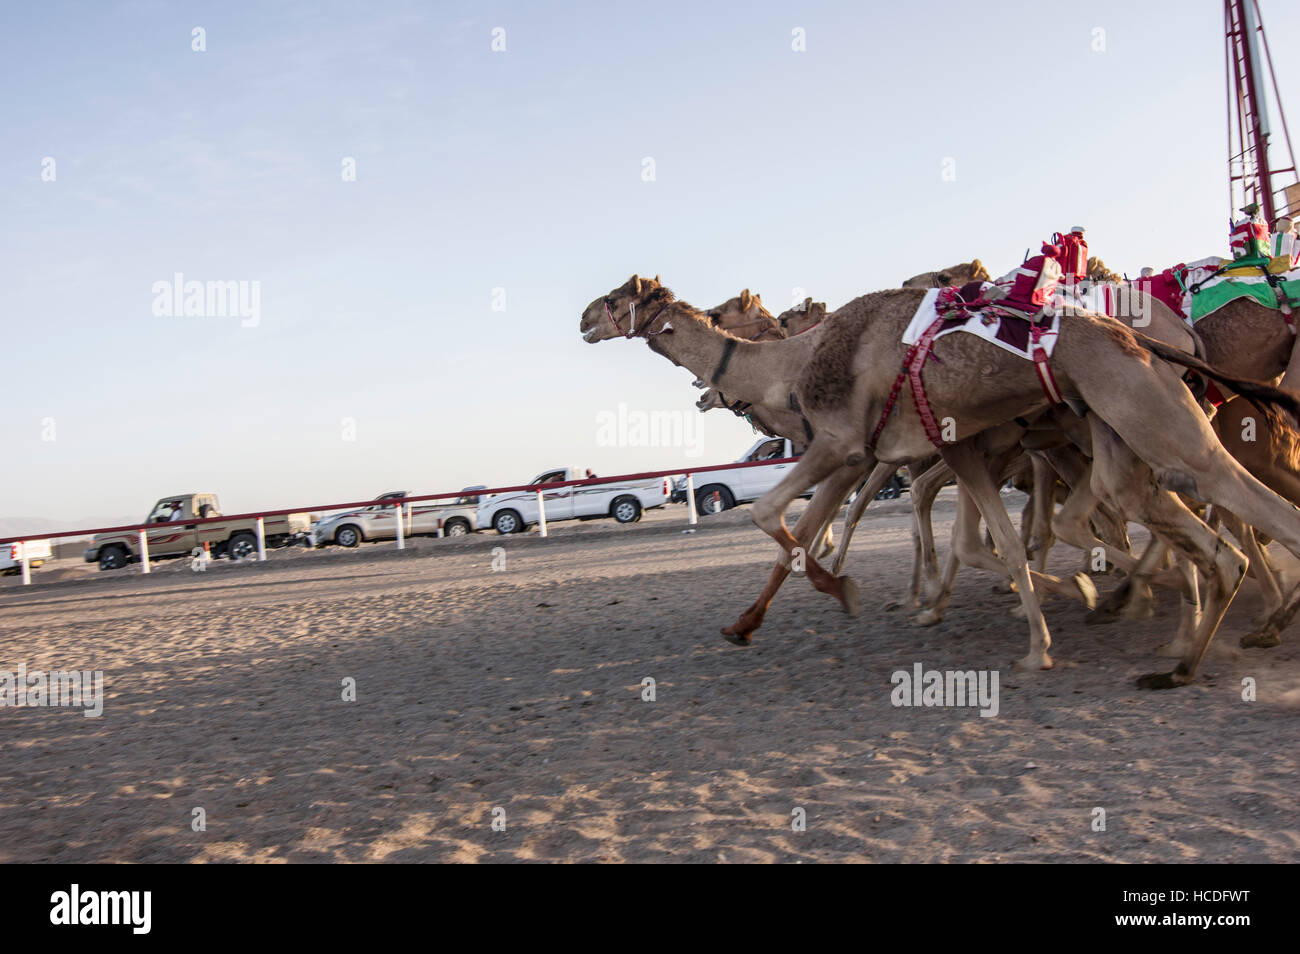 Camels bolting out of the starting gate in a camel race in Oman. SUV audience in the background, robot jockeys on the camels Stock Photo